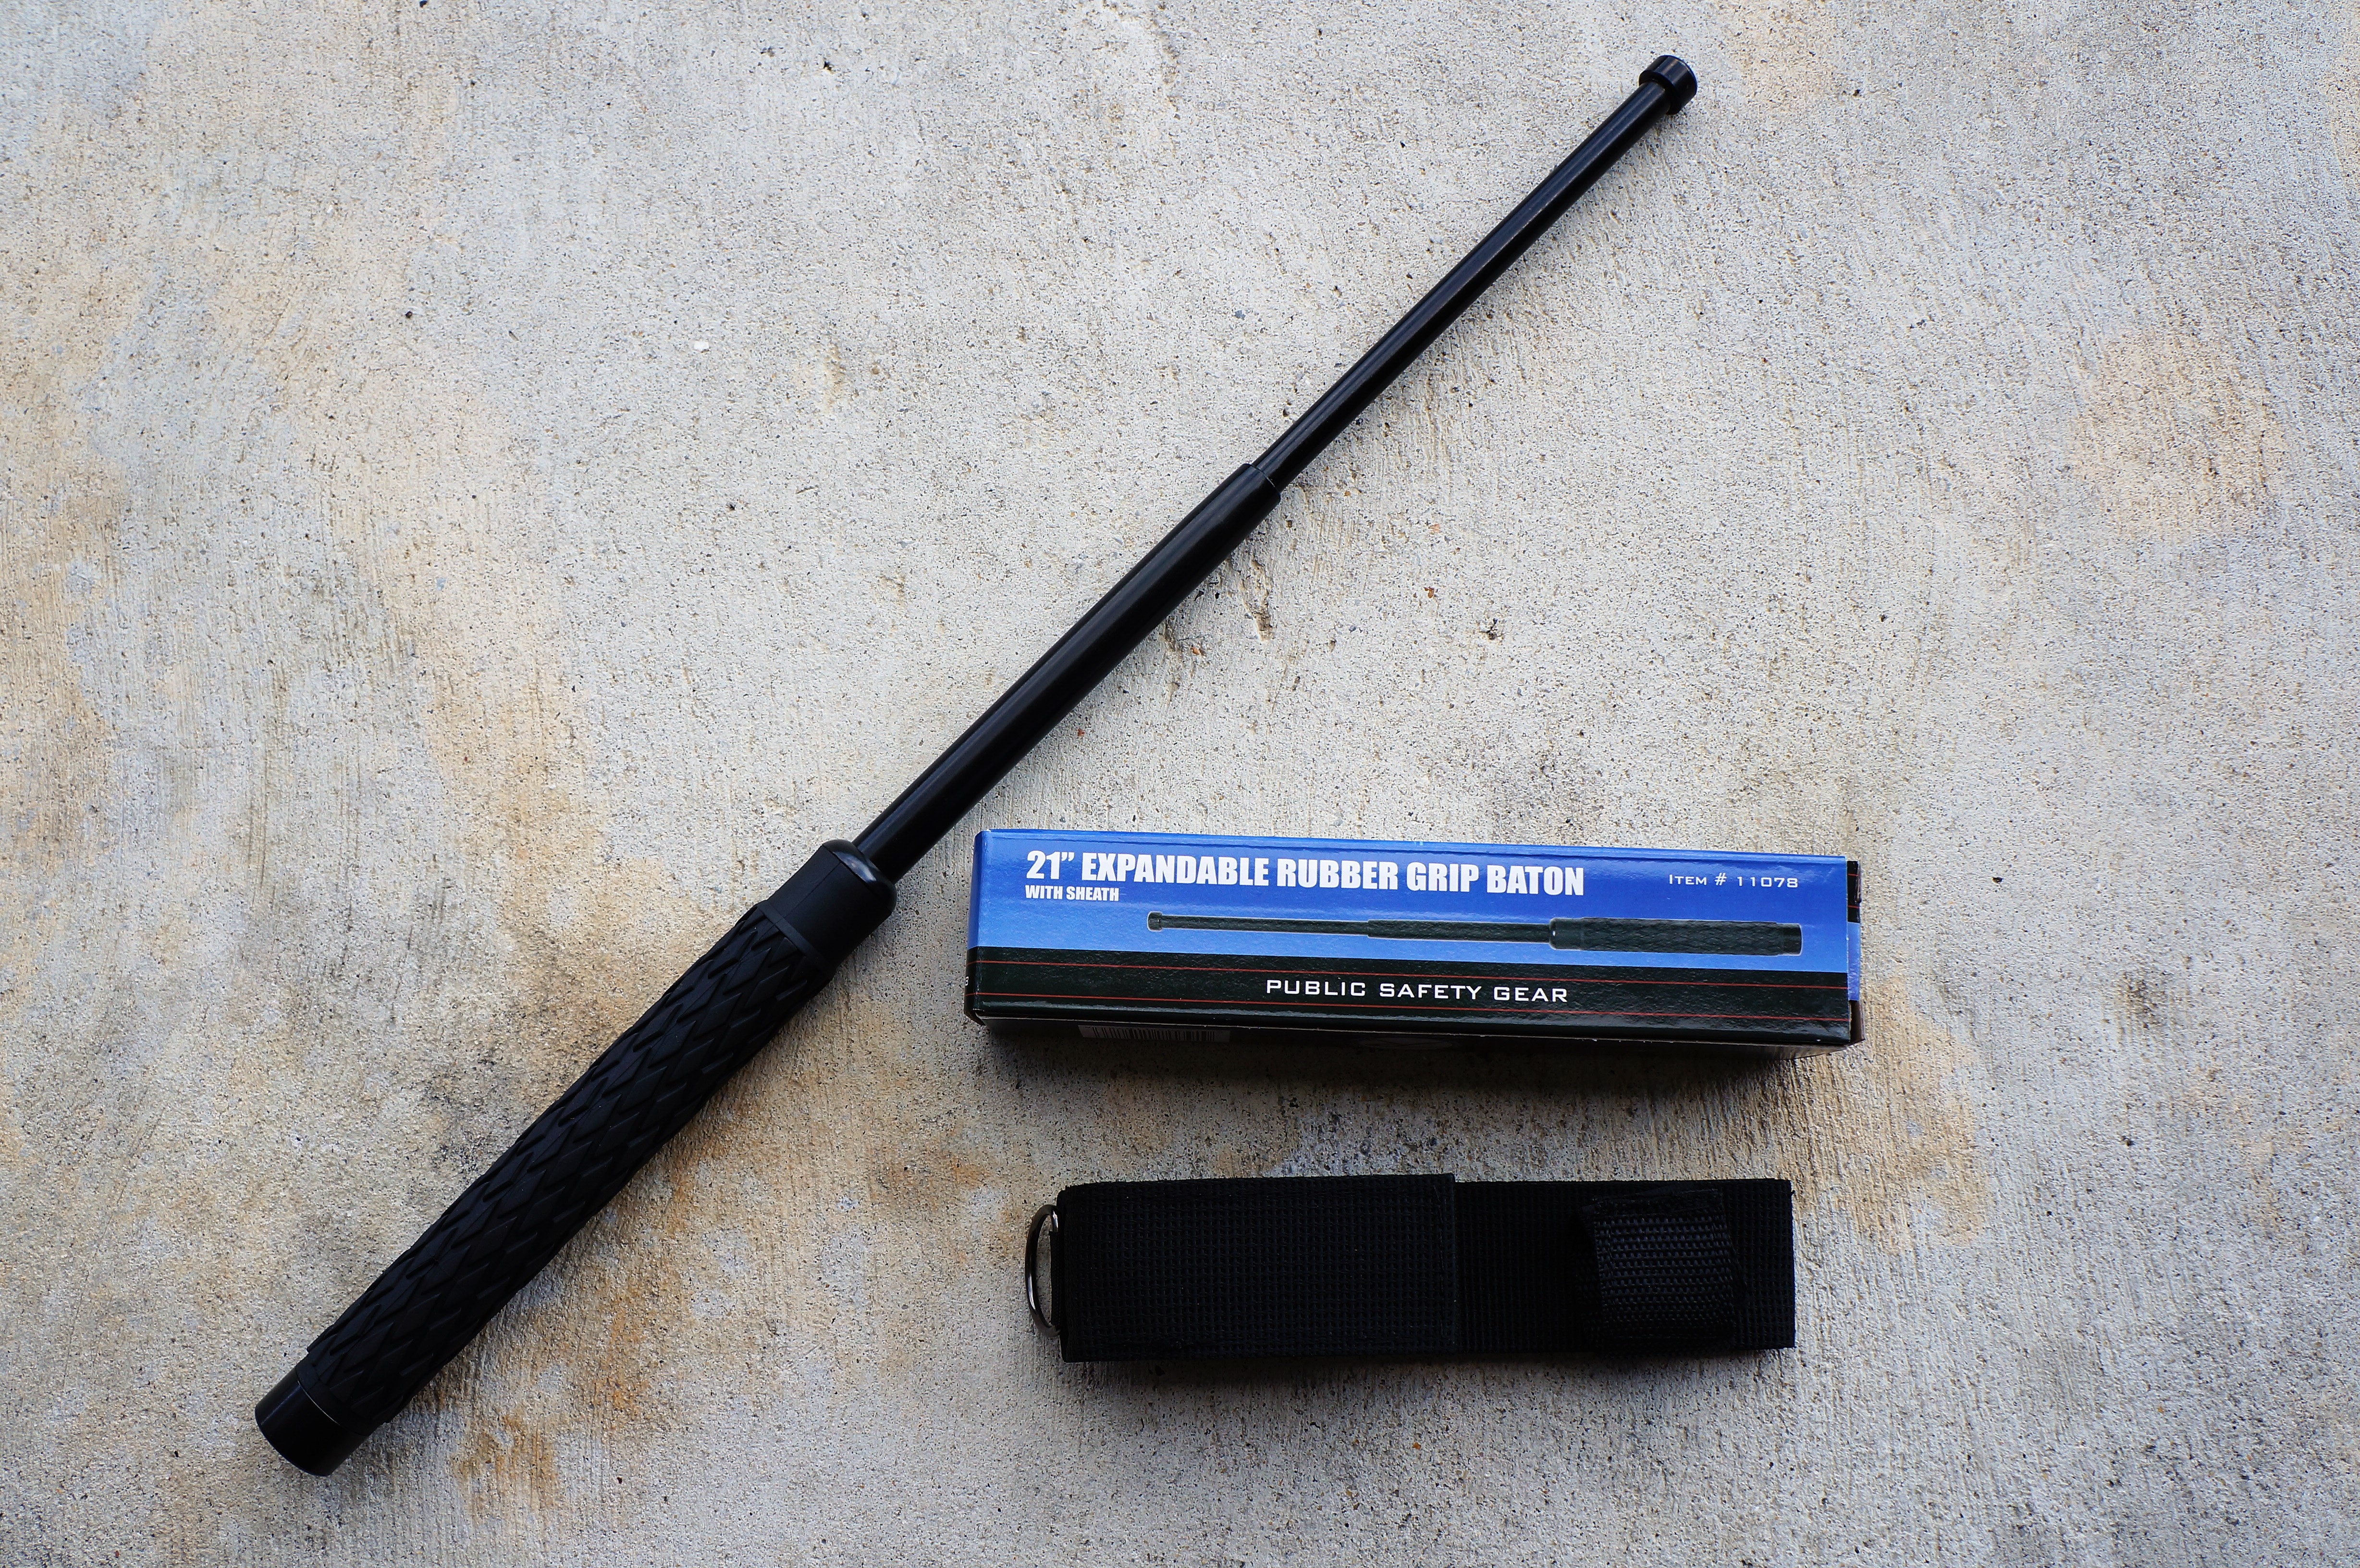 Expandable Rubber Grip Baton with Sheath 21"